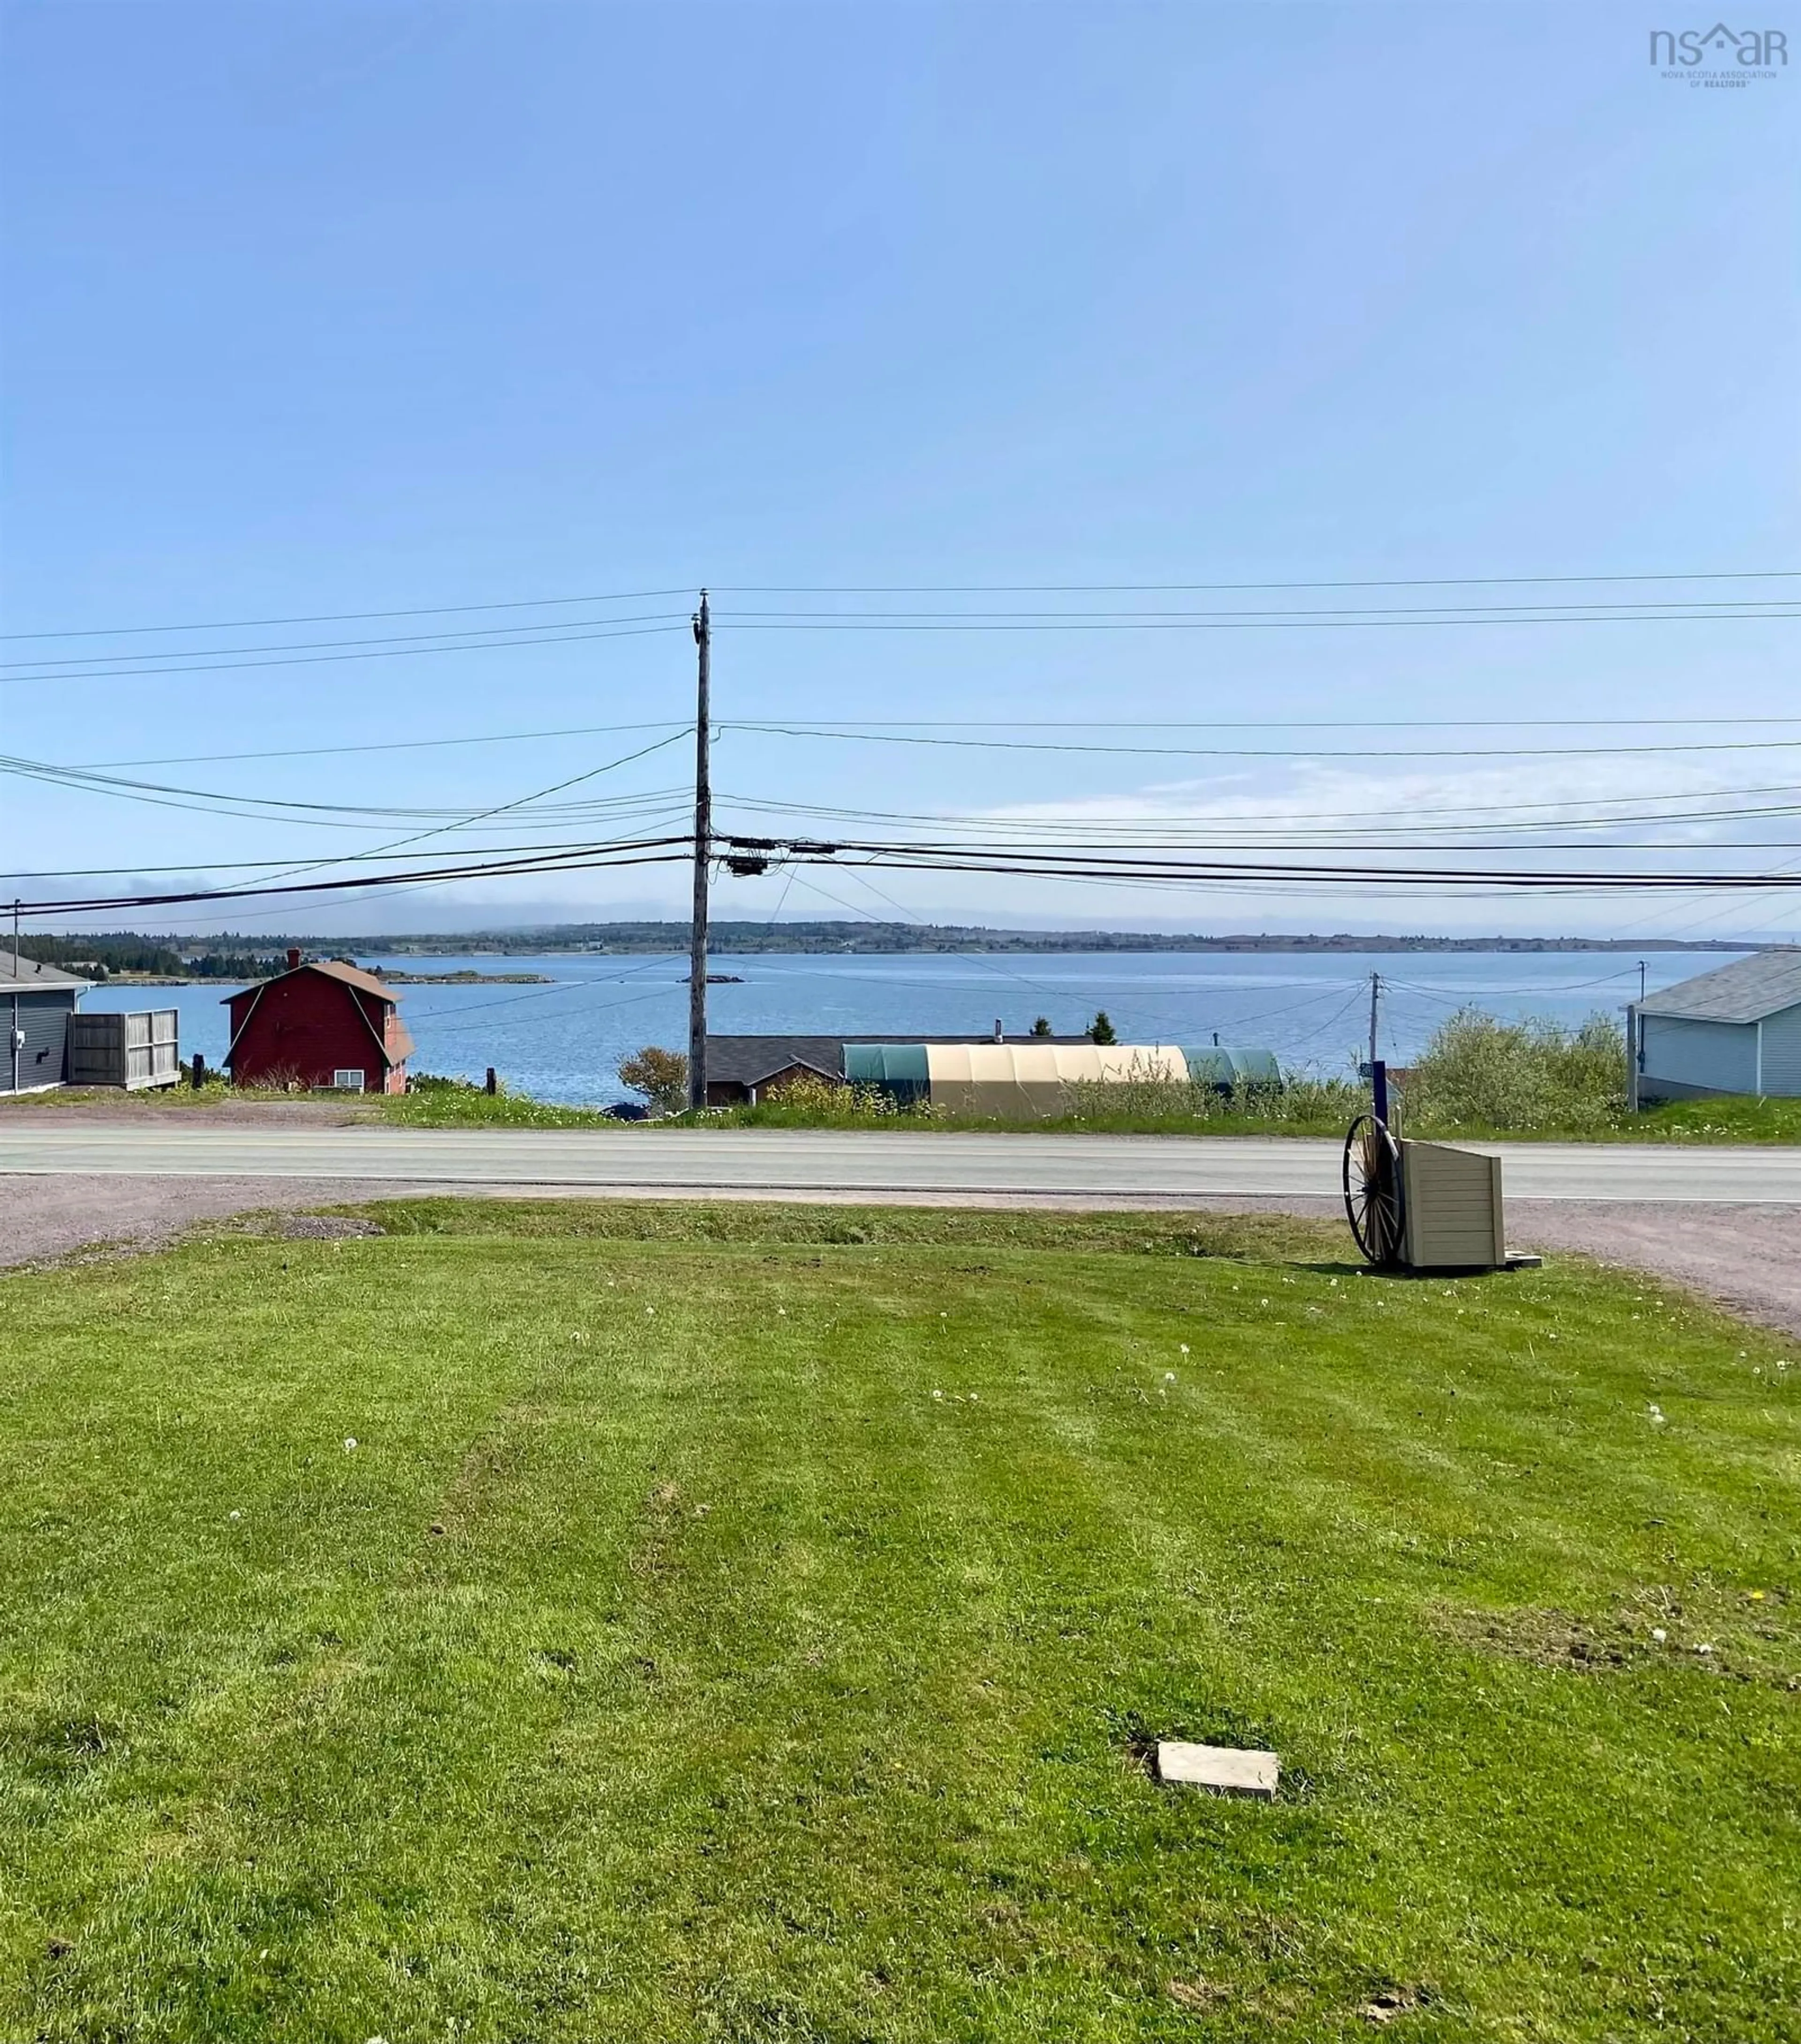 Lakeview for 2493 Highway 206, Arichat Nova Scotia B0E 1A0